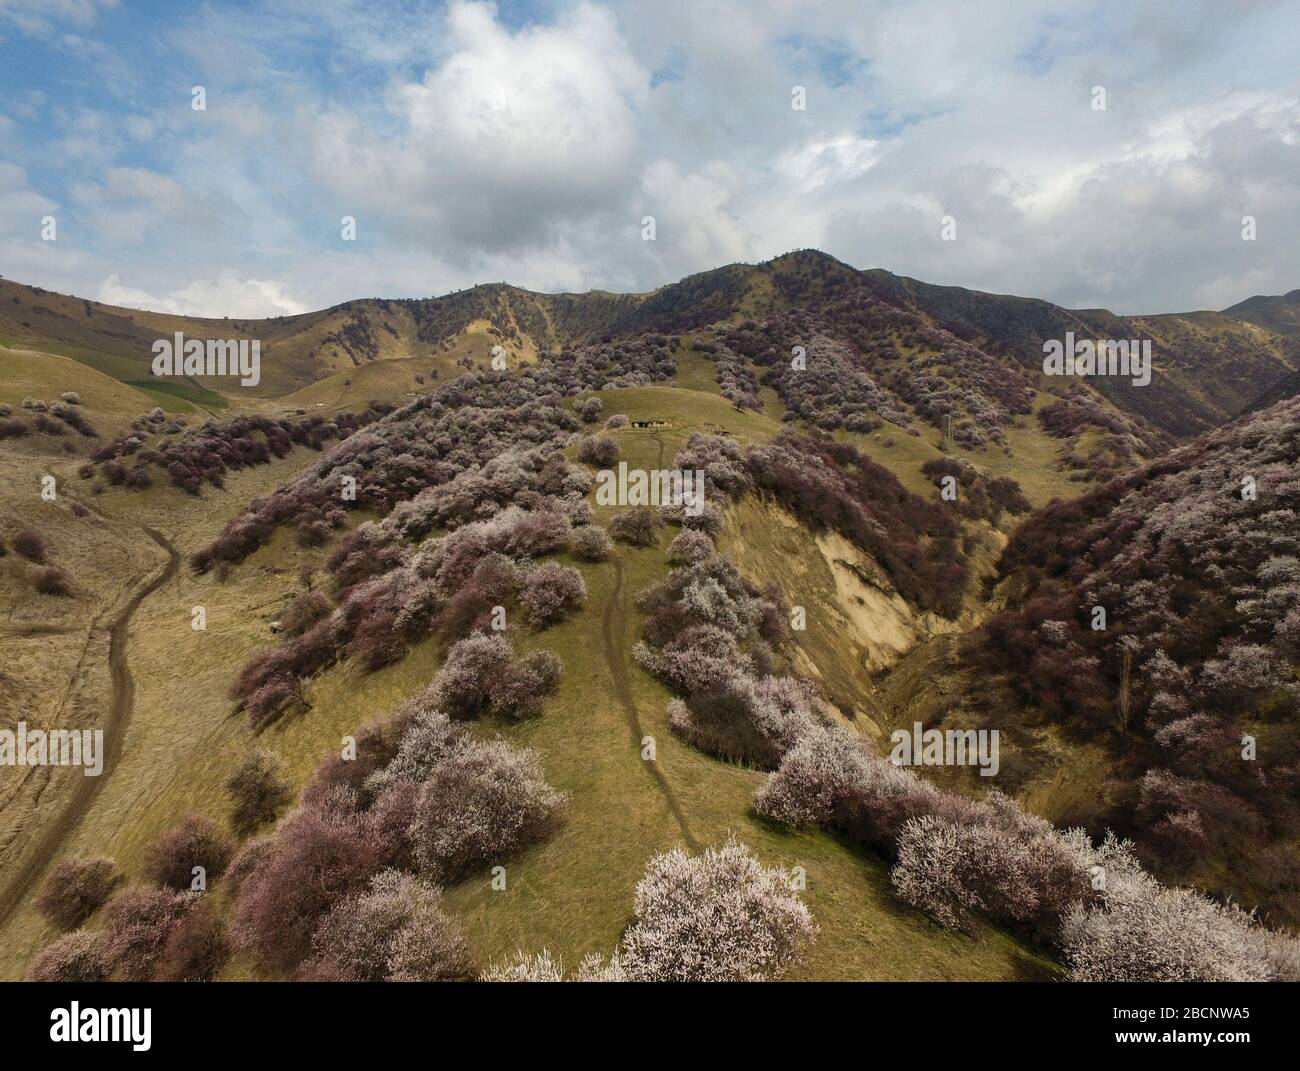 Ili. 4th Apr, 2020. Aerial photo taken on April 4, 2020 shows a valley with blossoming apricot trees in Xinyuan County of Ili Kazakh Autonomous Prefecture, northwest China's Xinjiang Uygur Autonomous Region. Credit: Song Yanhua/Xinhua/Alamy Live News Stock Photo